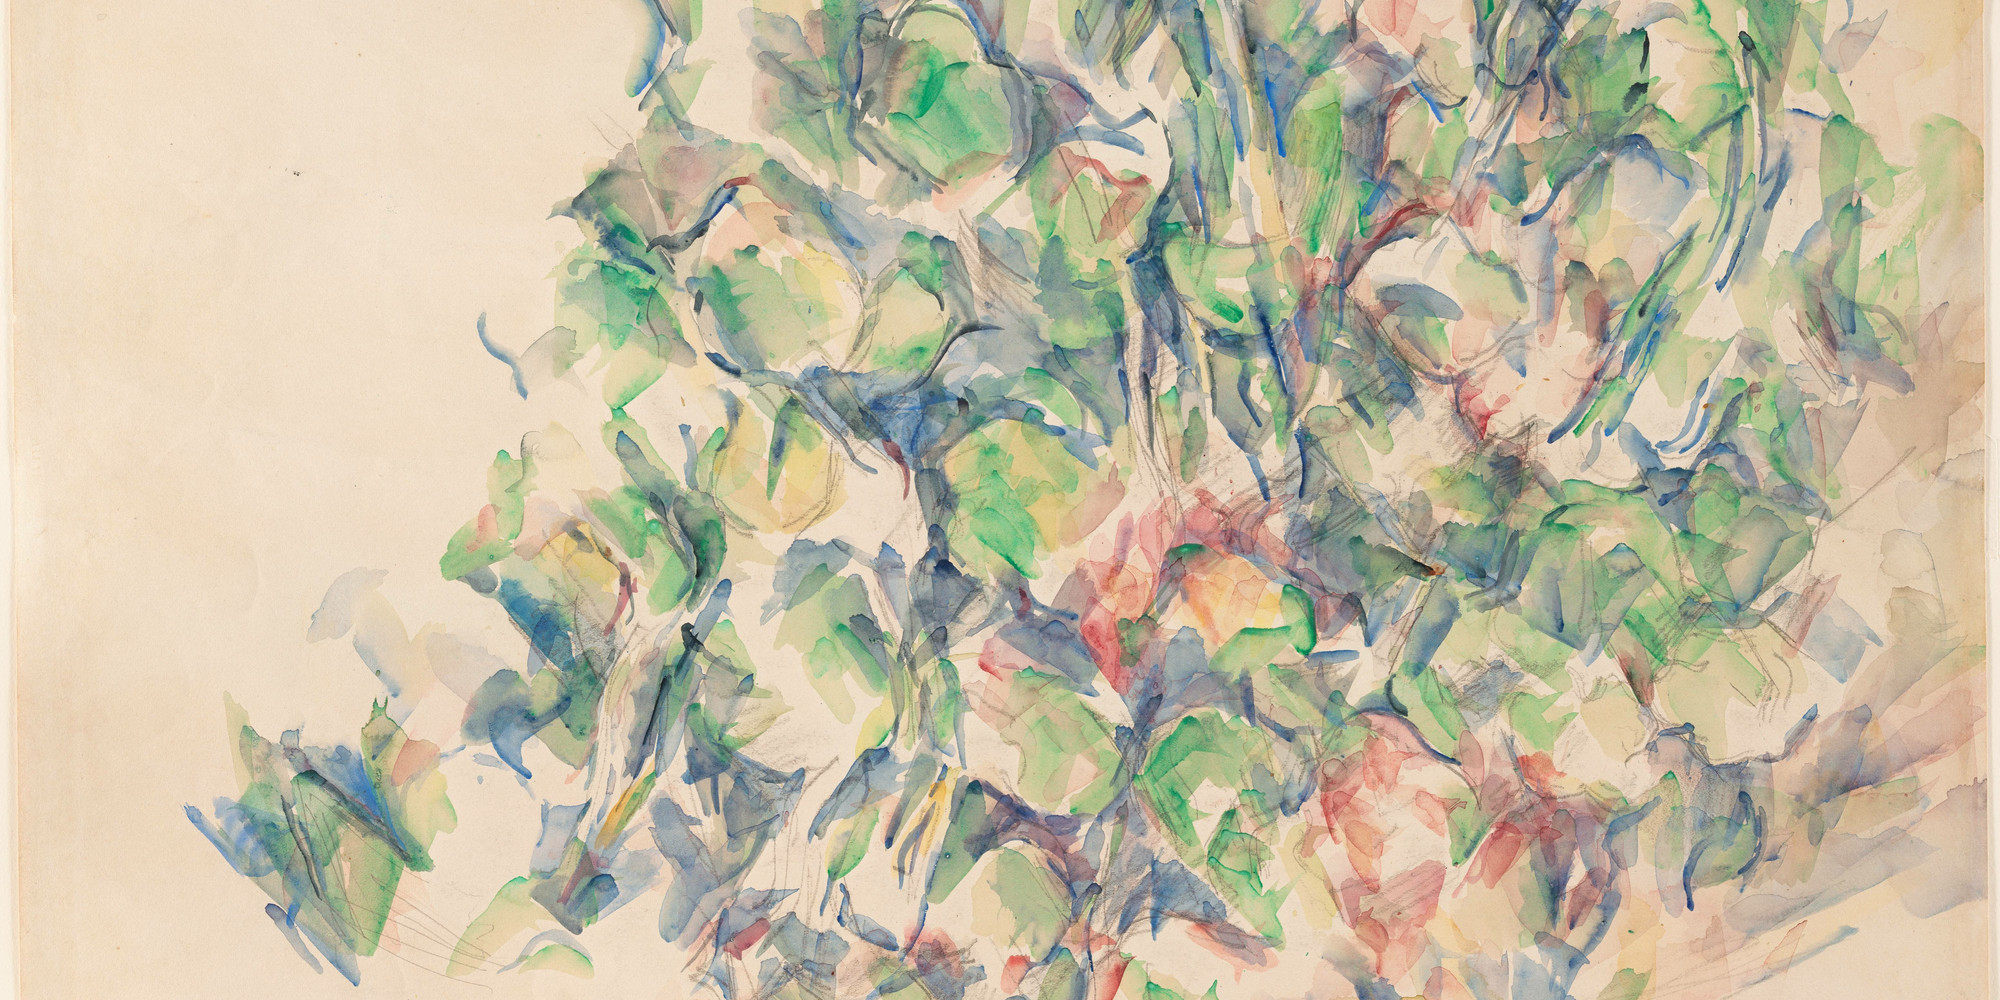 Paul Cézanne. Foliage (detail). 1900-04. Watercolor and pencil on paper. 17 5/8 x 22 3/8&#34; (44.8 x 56.8 cm). The Museum of Modern Art, New York, Lillie P. Bliss Collection